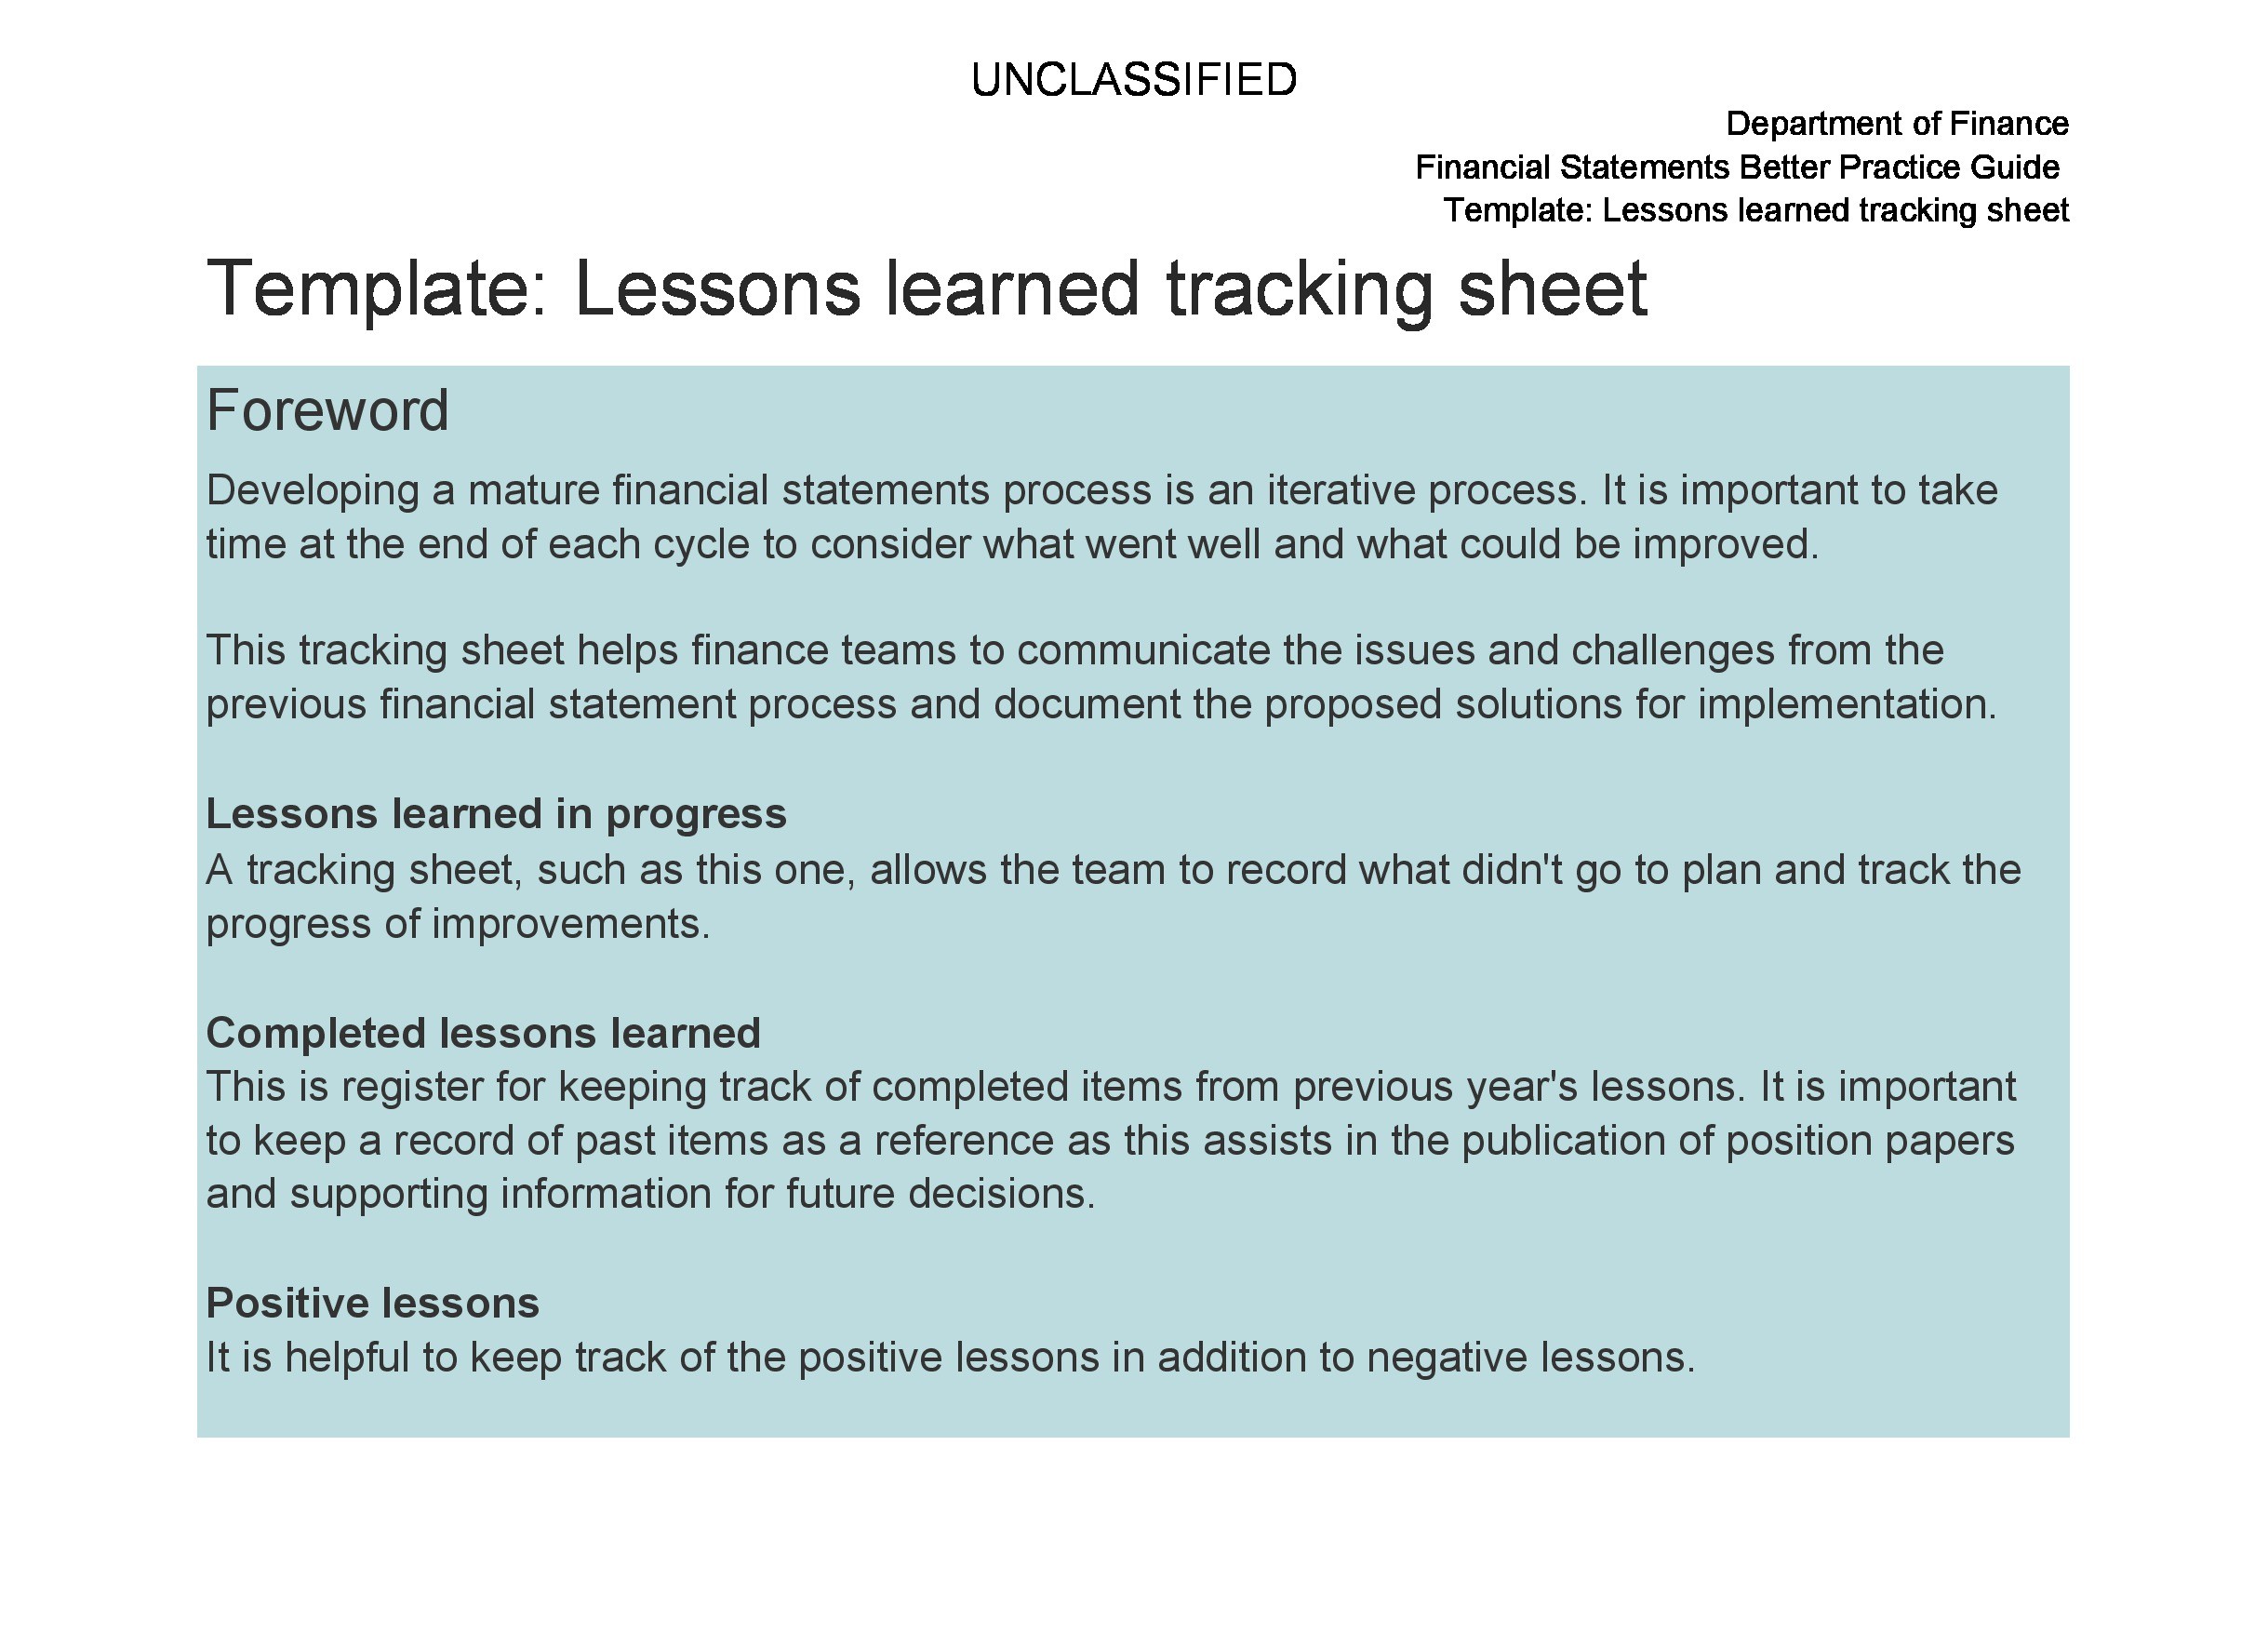 Free lessons learned template 14